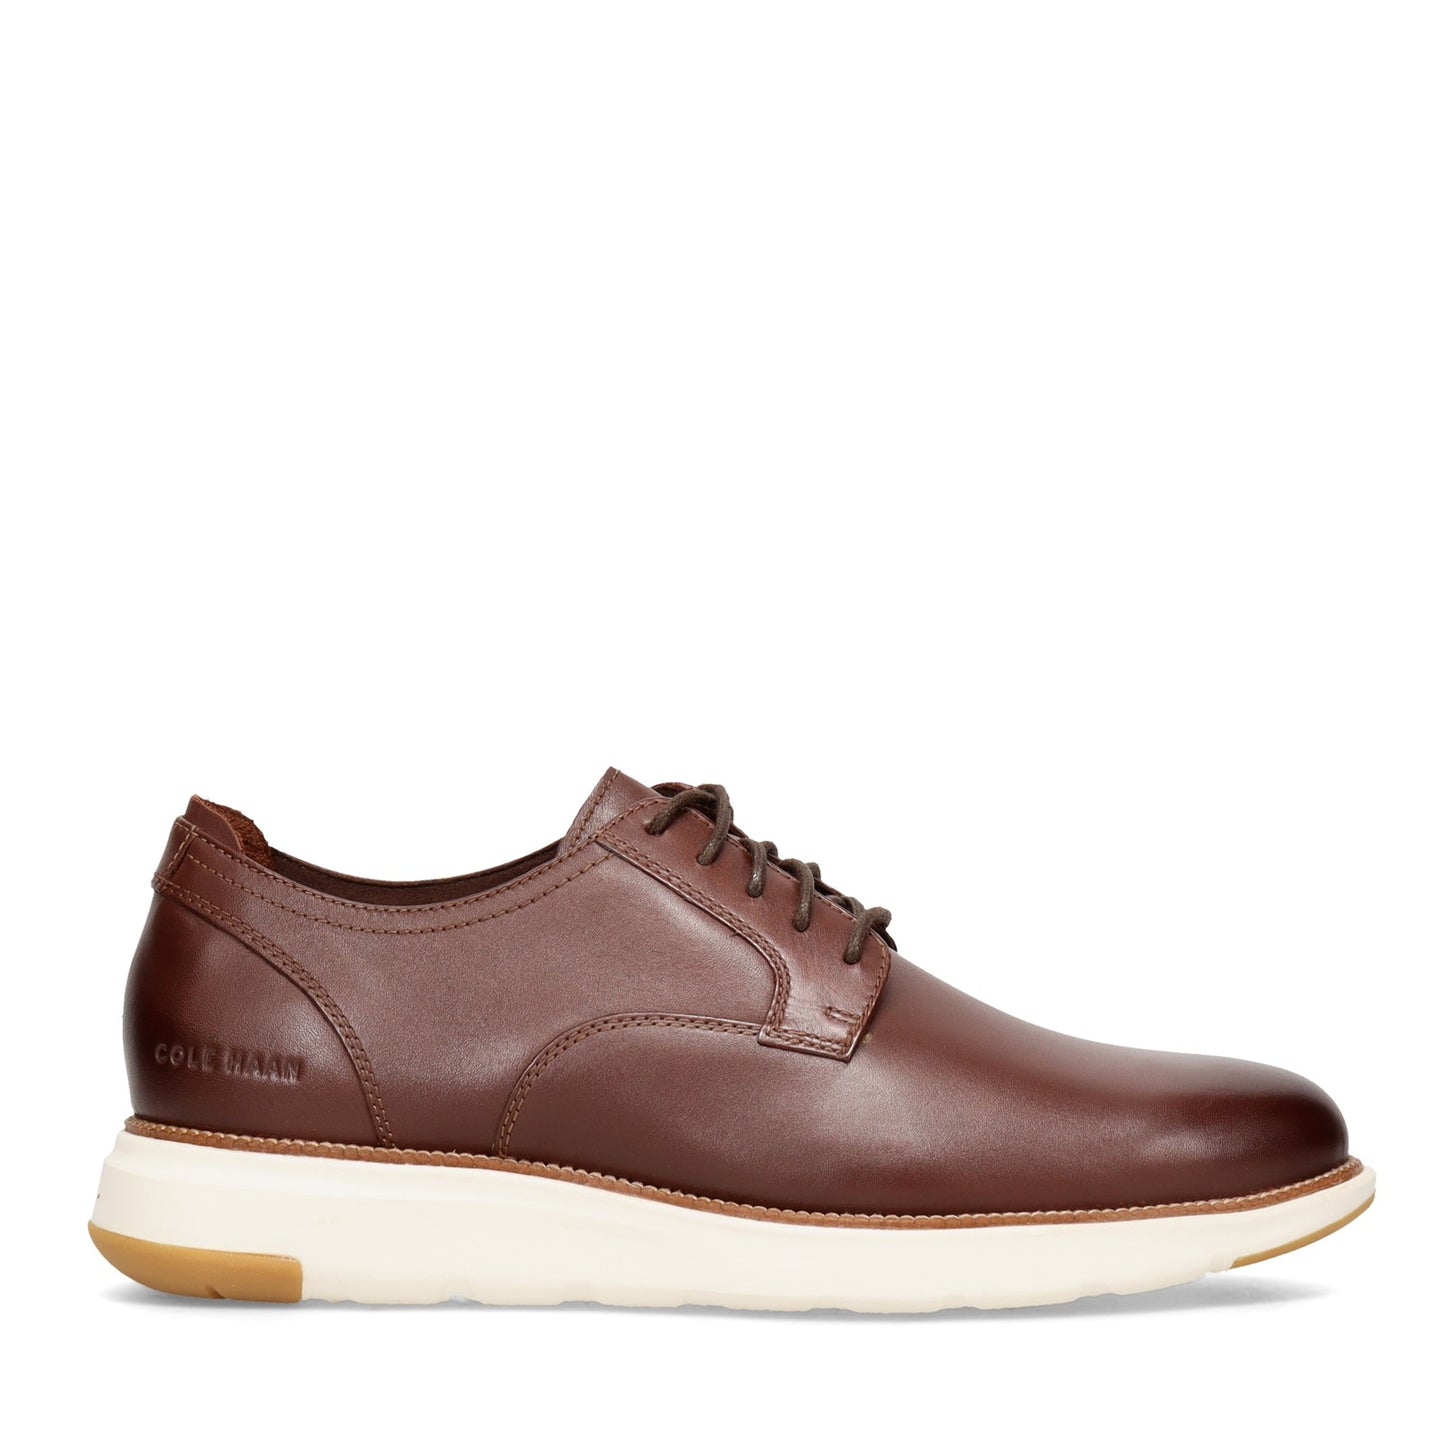 Cole Haan Men's Leather Grand Atlantic Oxford - Chestnut/Ivory